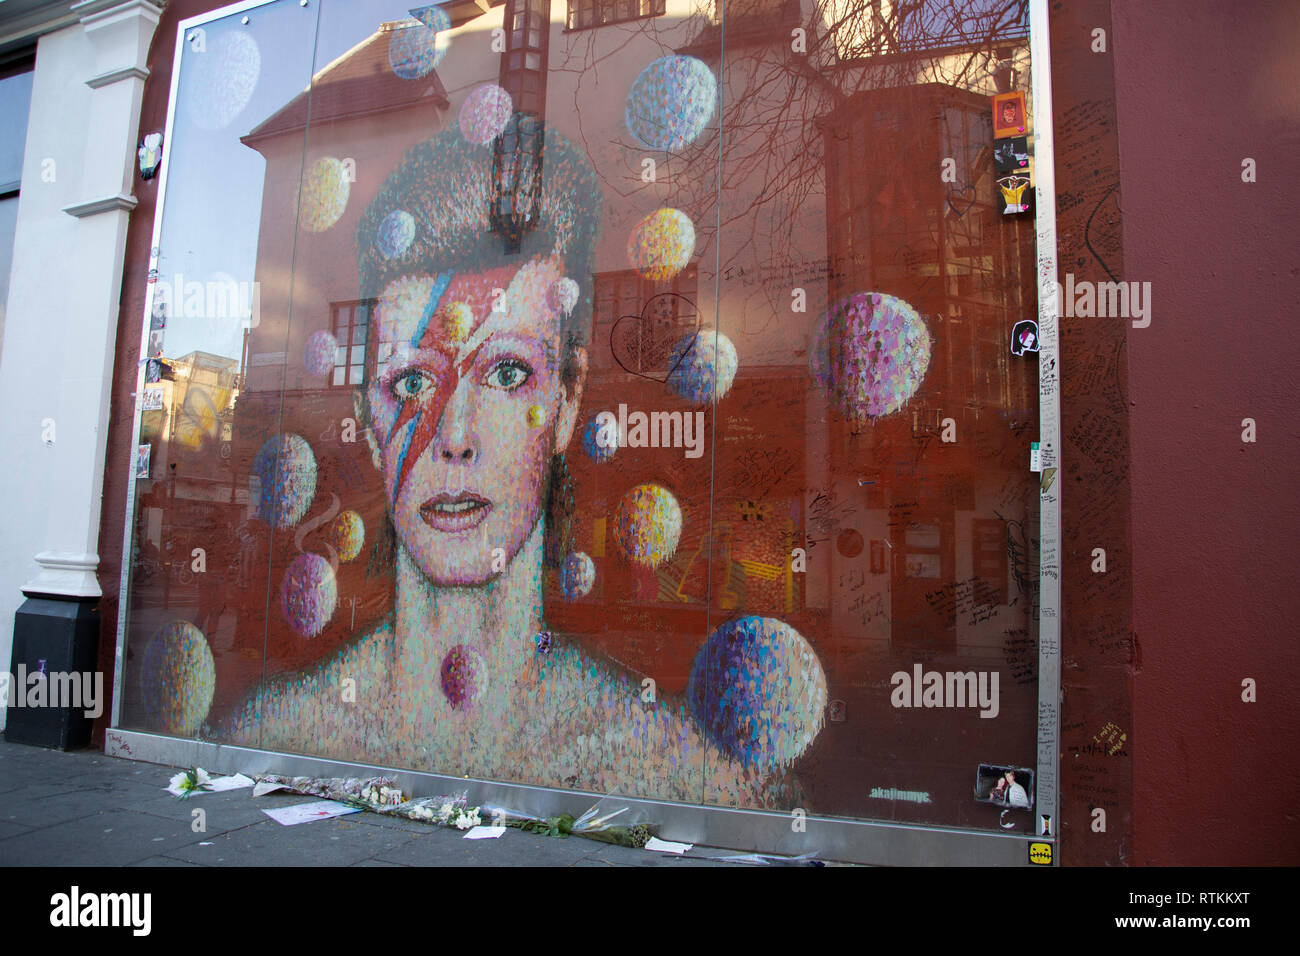 Portrait of David Bowie on a wall in Brixton. Street art. Stock Photo